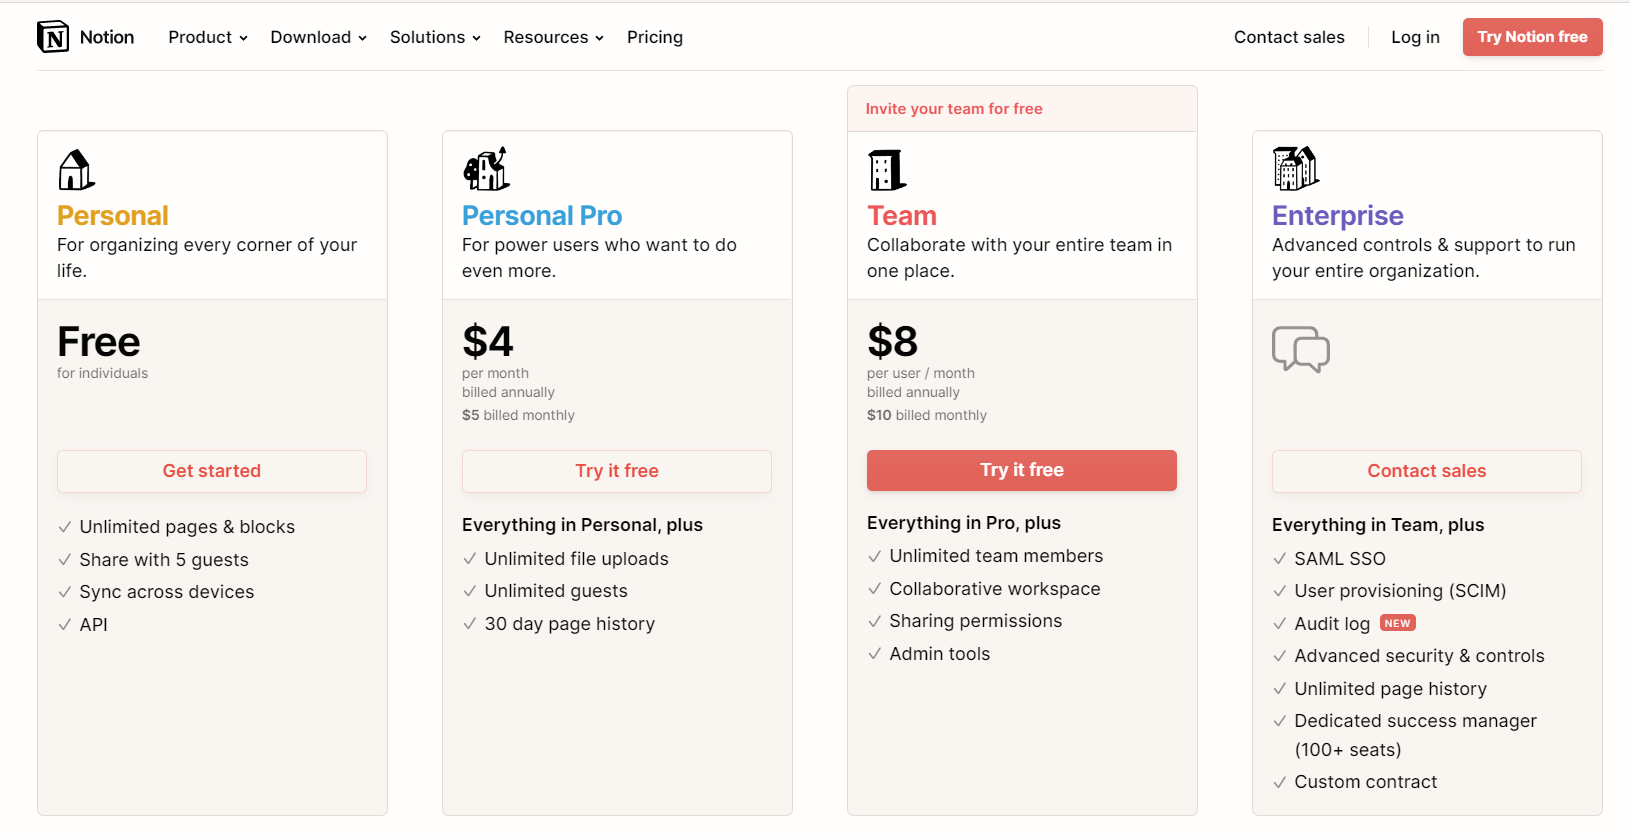 4 tier pricing plan of Notion, Starting with Free plan for personal usage